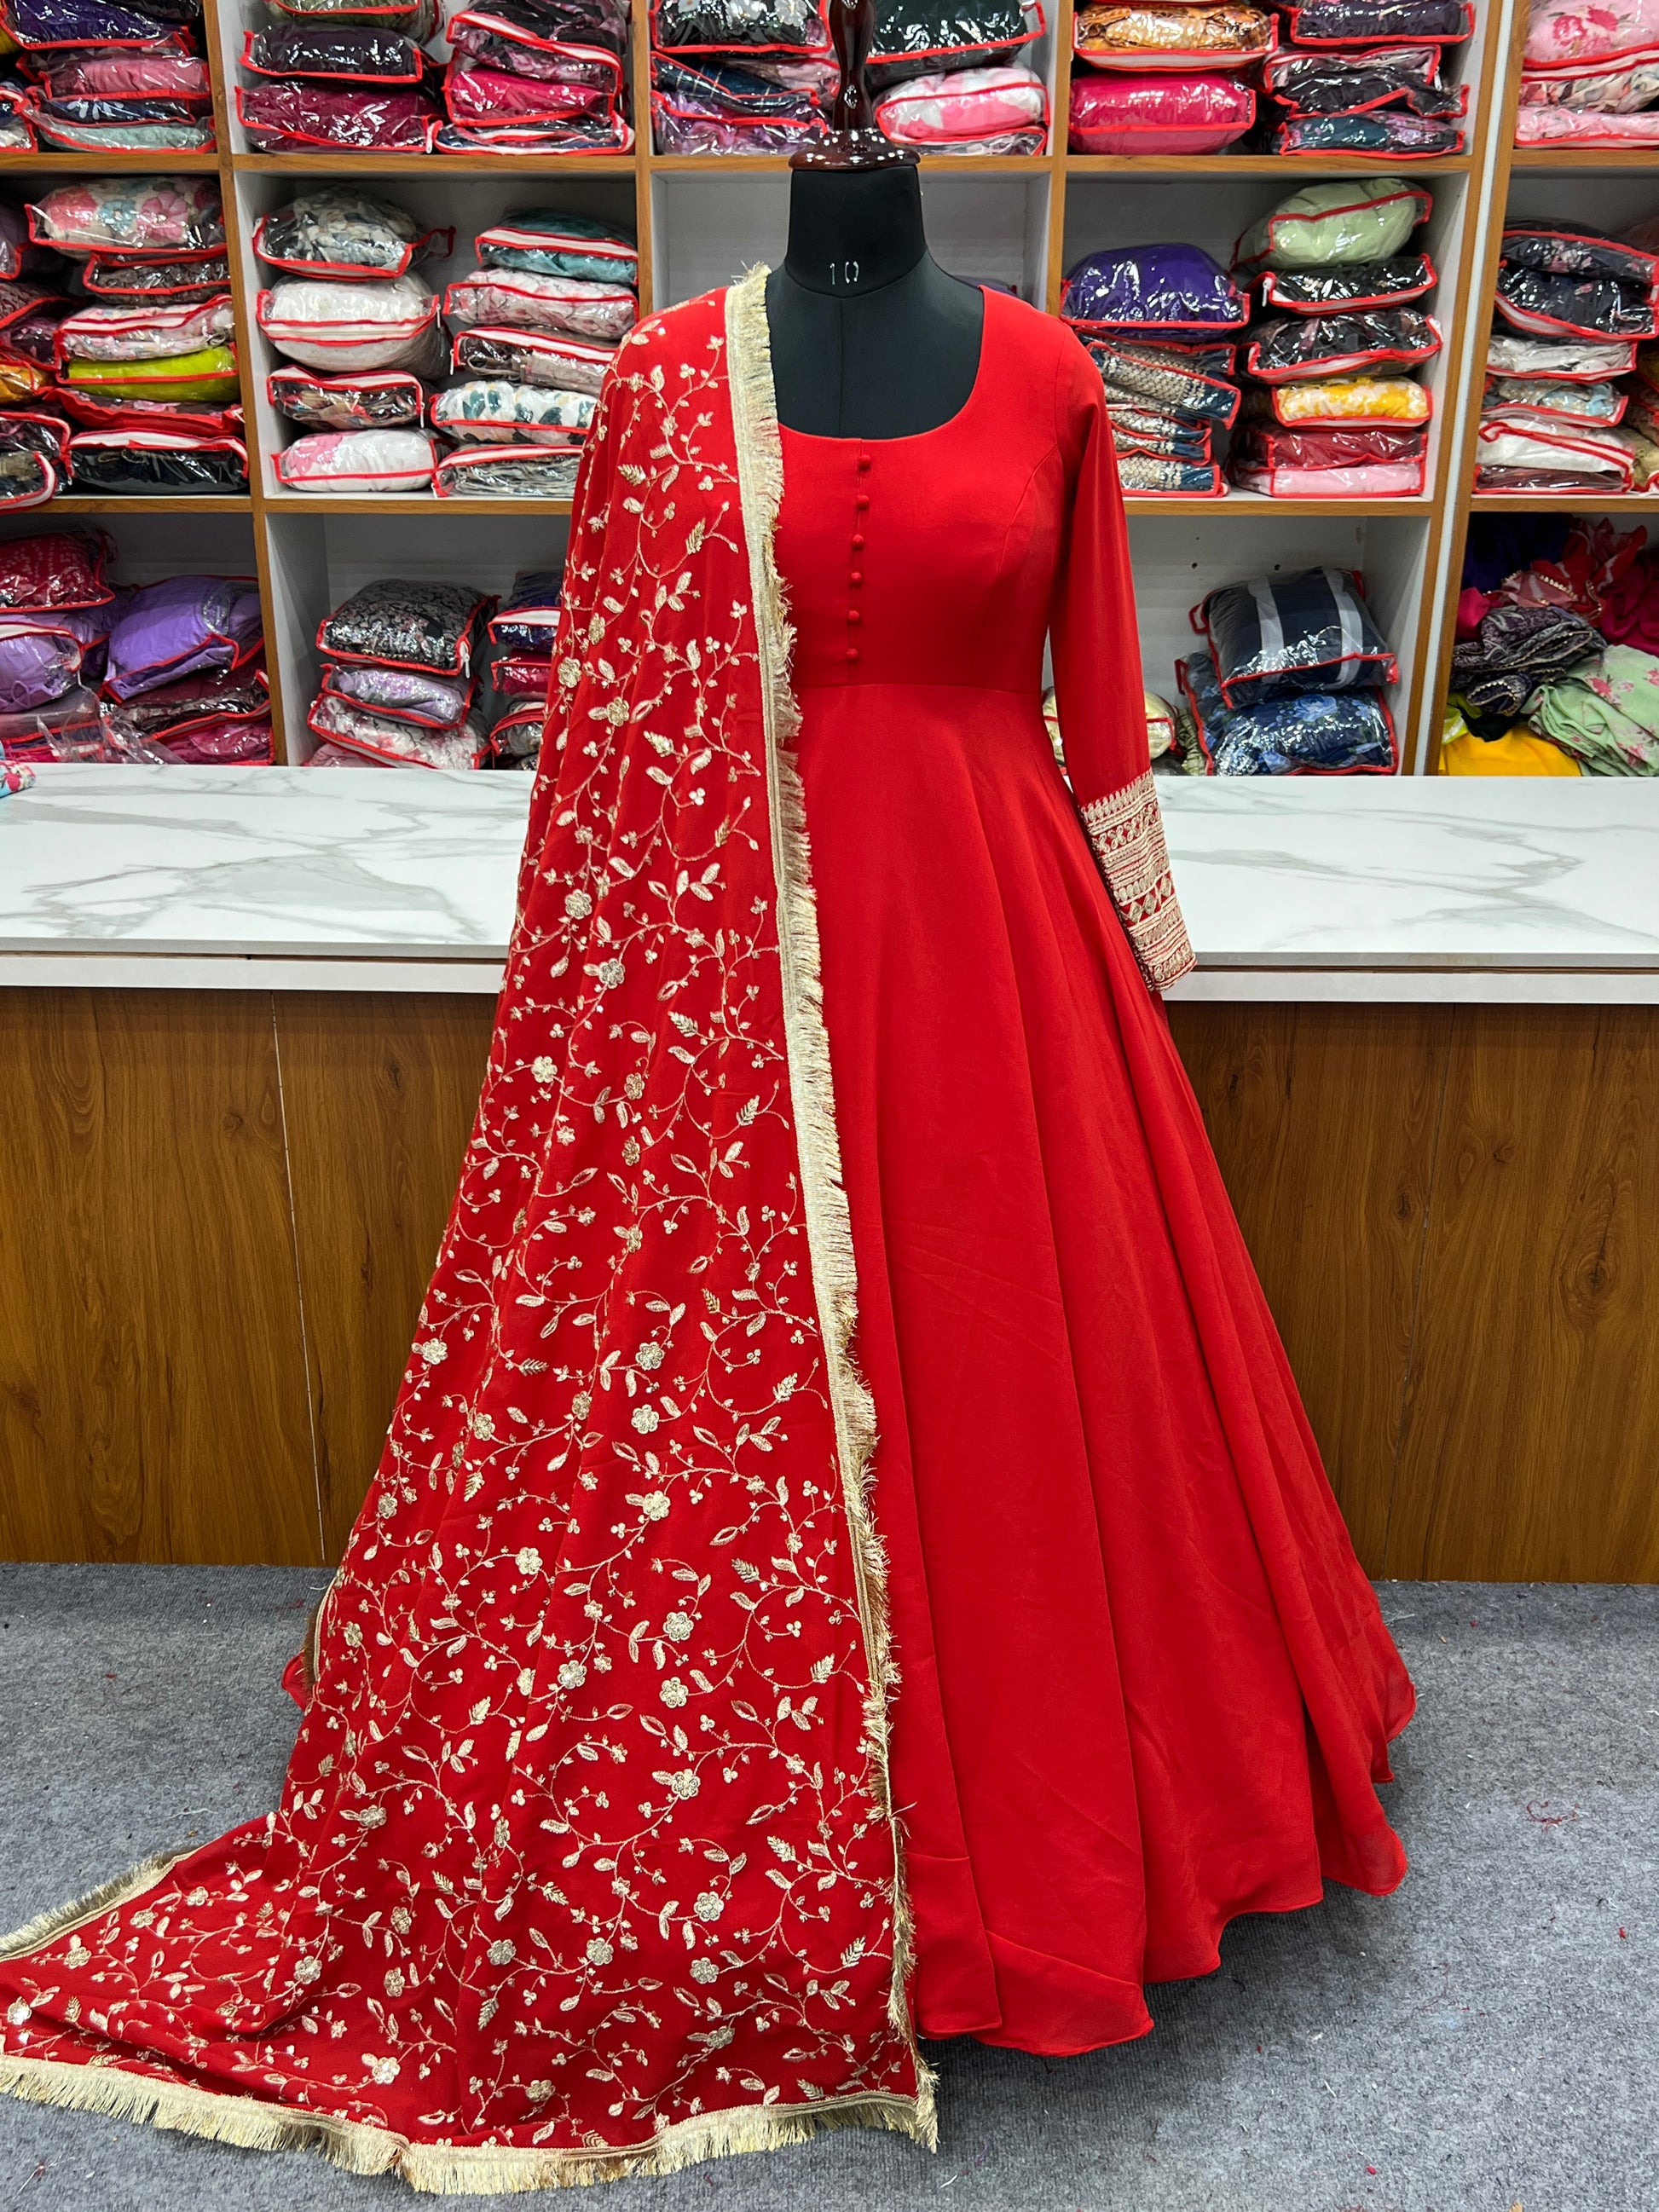 Readymade Cotton Chikan Work Dress Material Wholesale Manufacturer in Surat  - Solanki Textiles